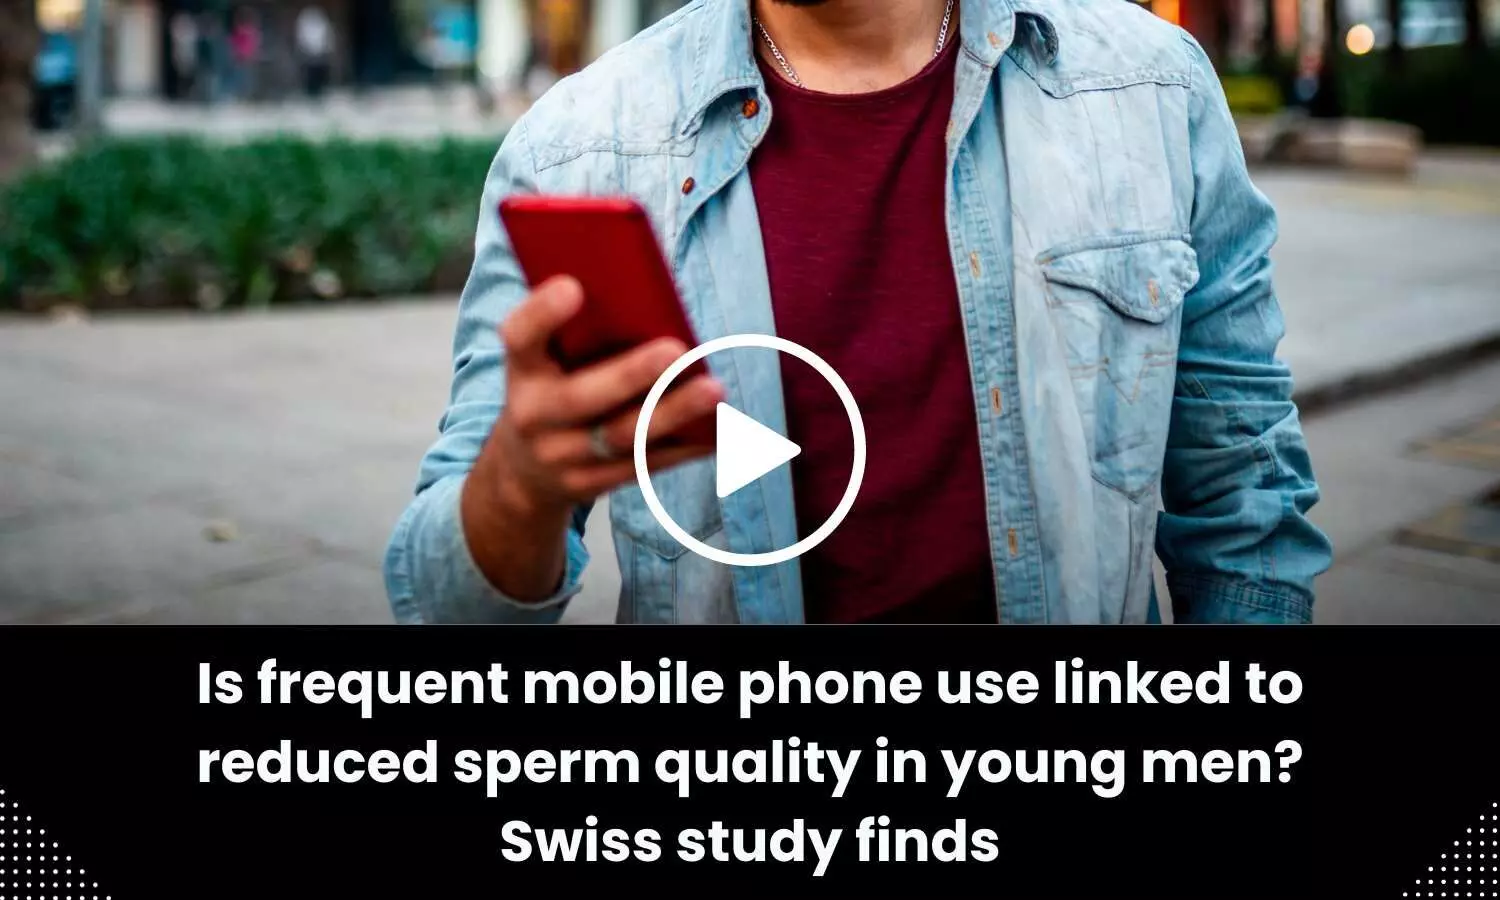 Is frequent mobile phone use linked to reduced sperm quality in young men? Swiss study finds